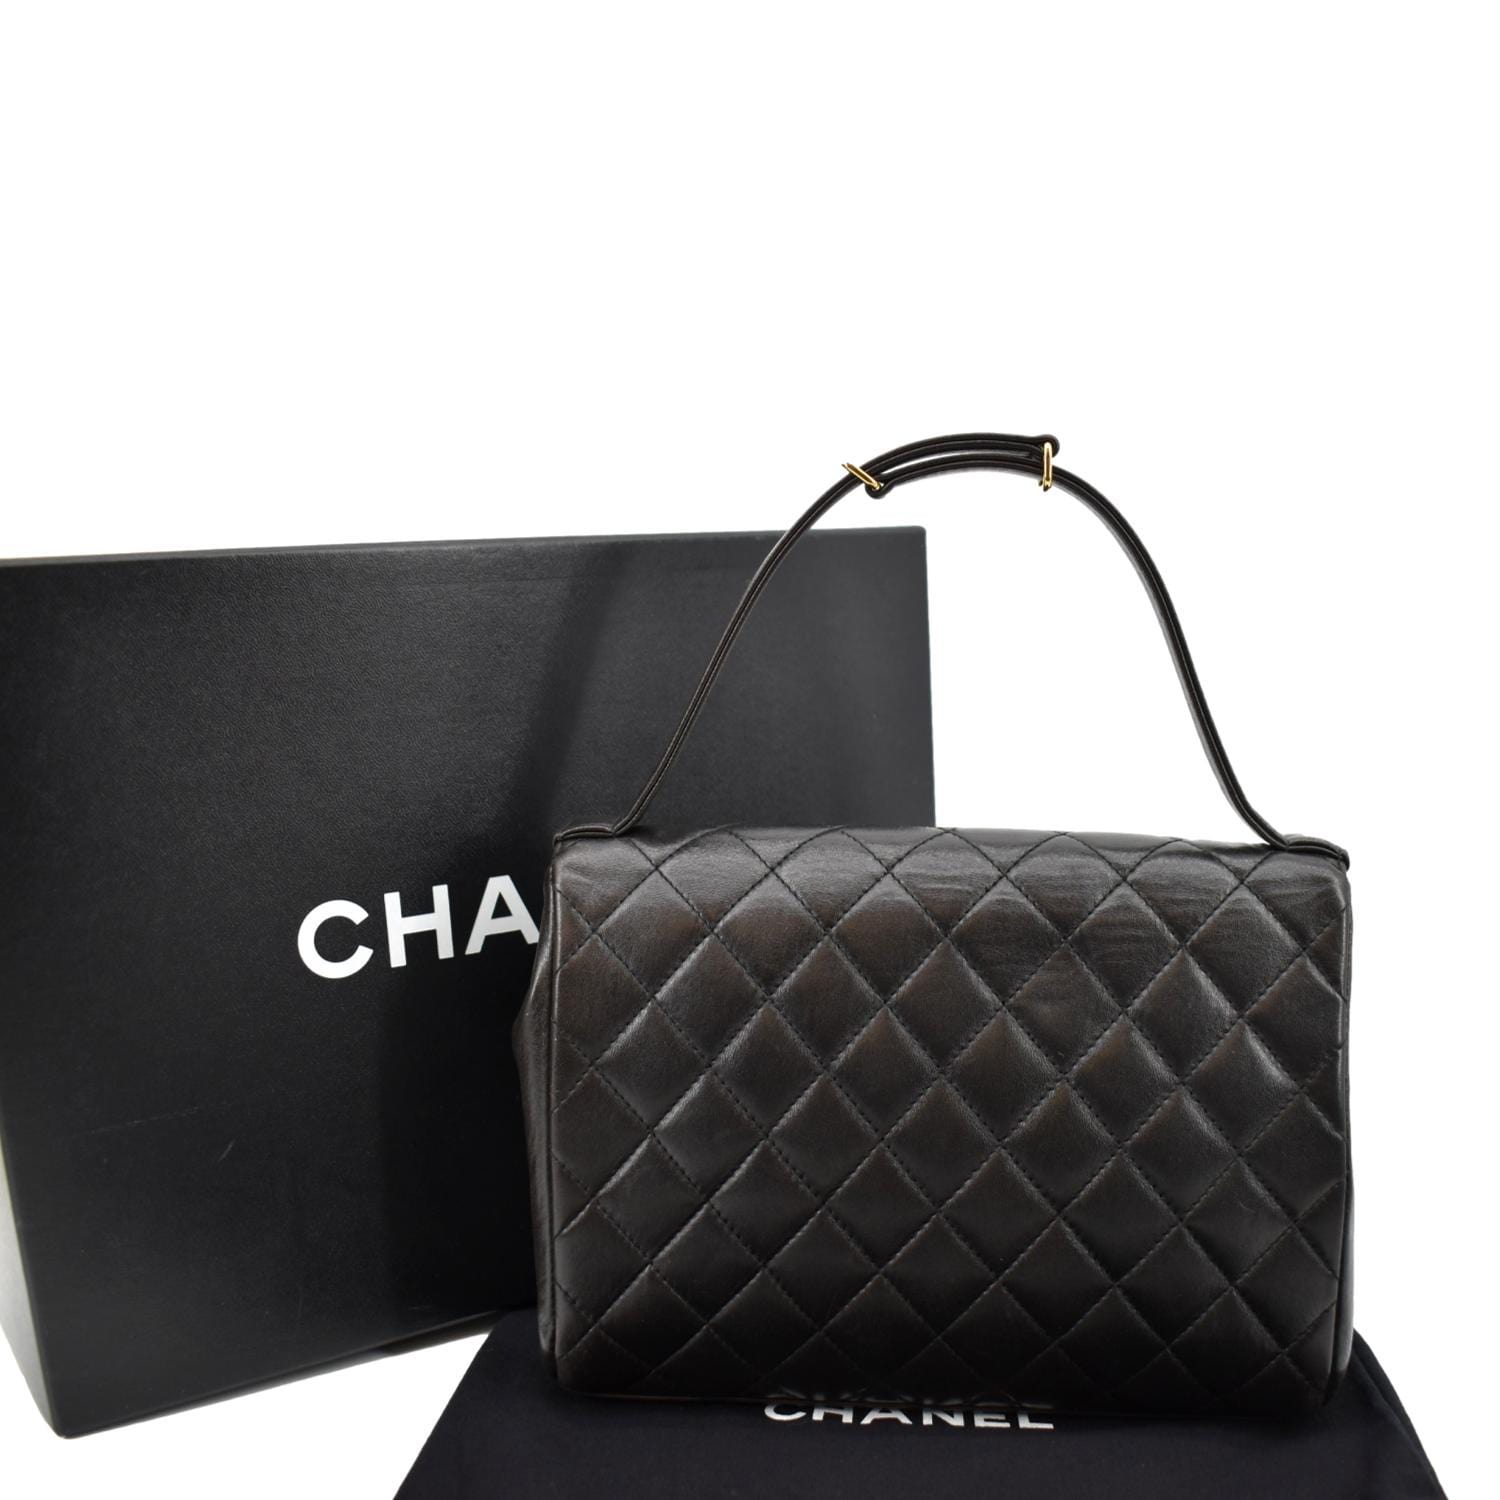 CHANEL Vintage Flap Quilted Leather Top Handle Bag Black